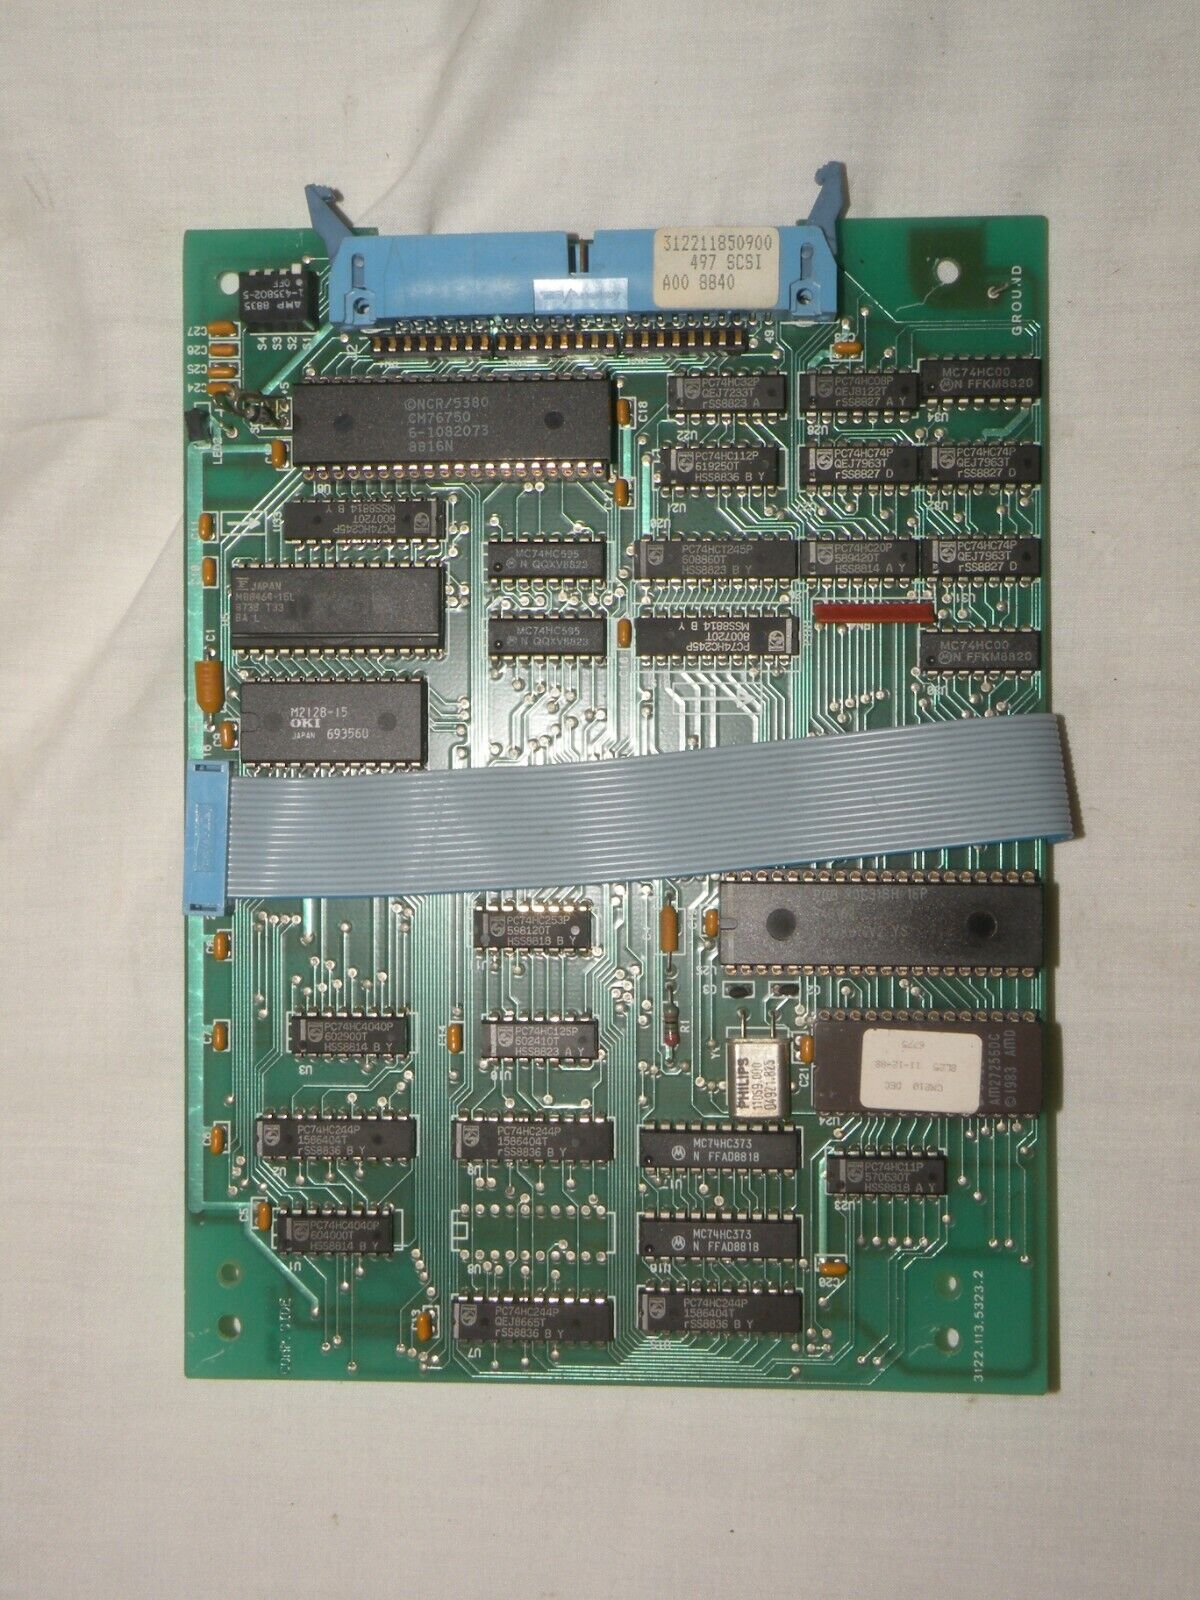 VINTAGE SCSI ADAPTER BOARD FOR USE IN DEC VAXSTATION 3100 & MICROVAX 3100 